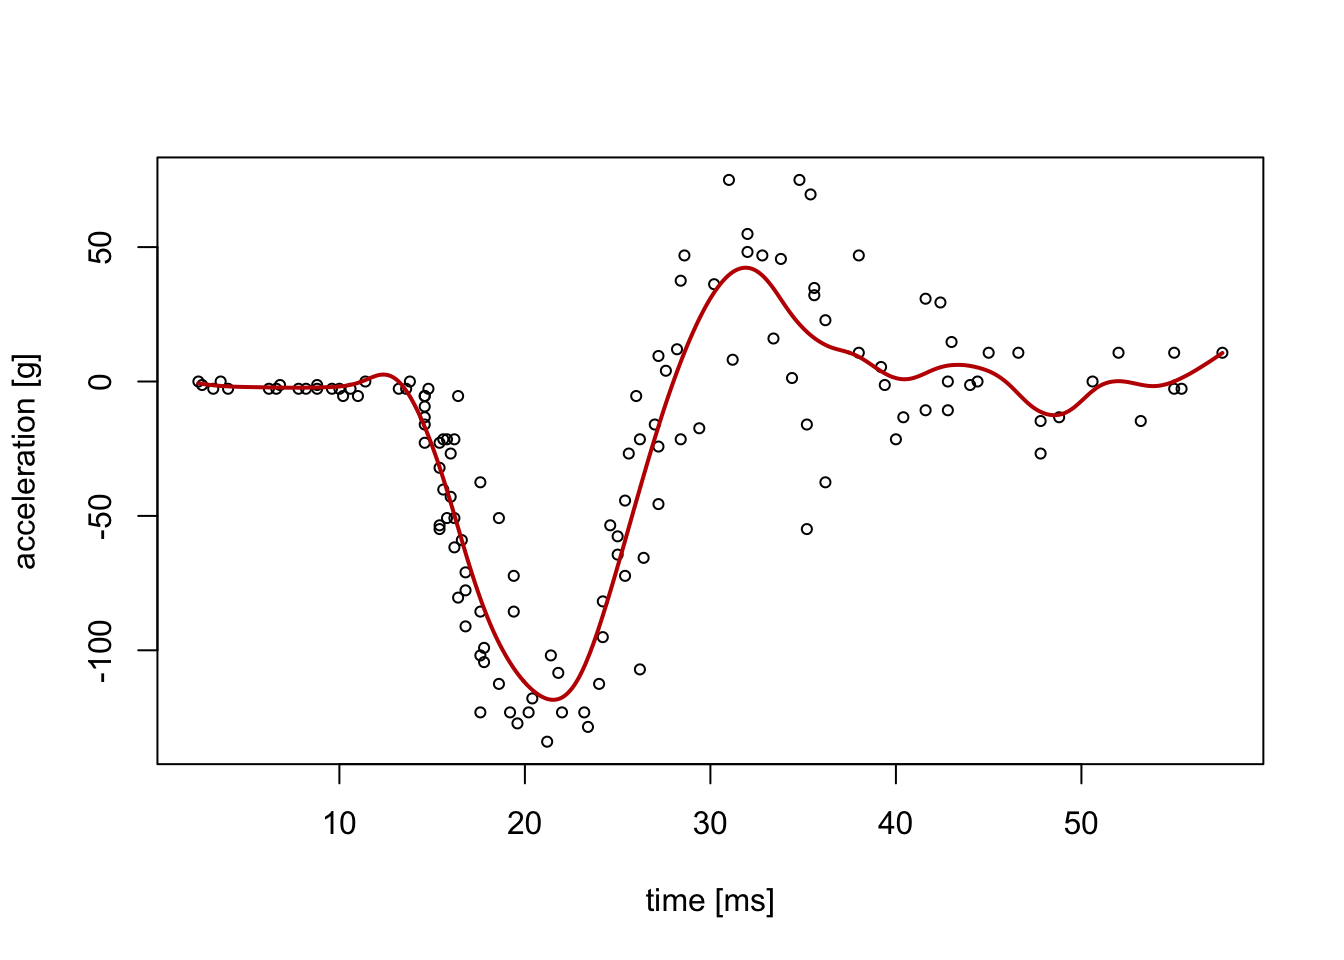 An illustration of a dataset where a linear (straight line) model is not appropriate. The data represents a series of measurements of head acceleration in a simulated motorcycle accident, used to test crash helmets (the mcycle dataset from the MASS R package).